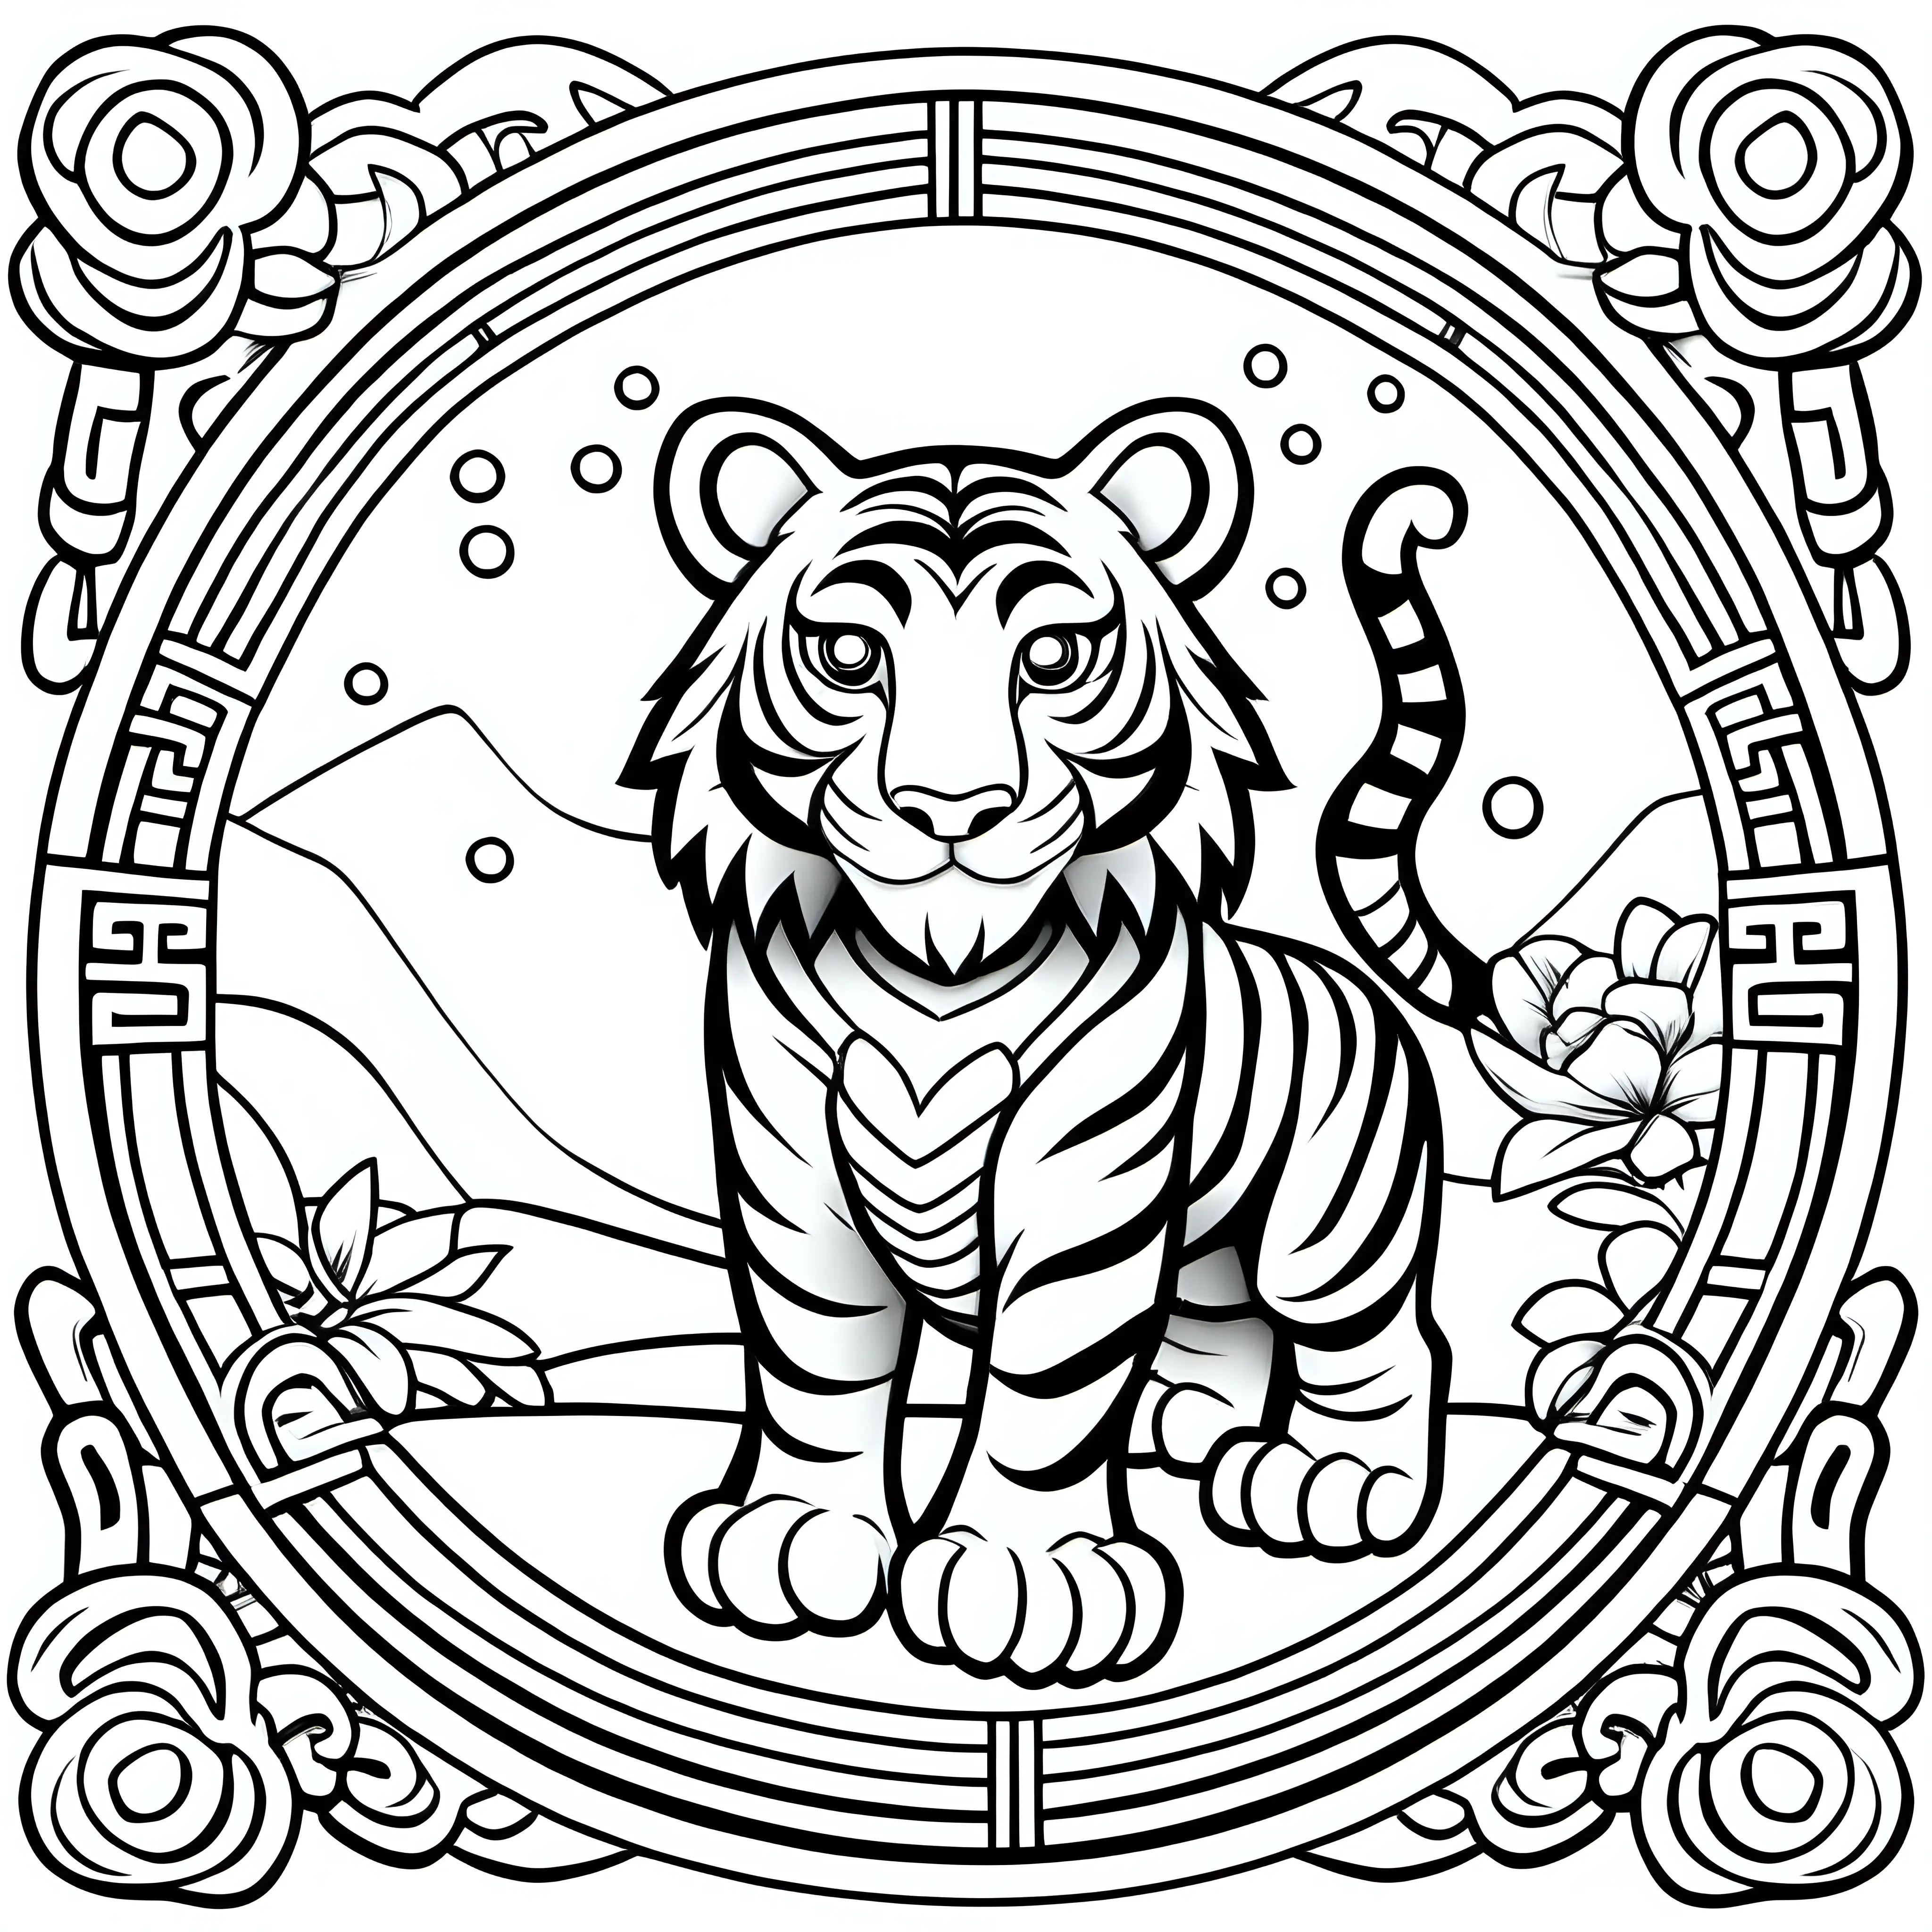 kids colouring book page, lunar new year, Chinese zodiac tiger, cartoon style, no shading, black and white only
